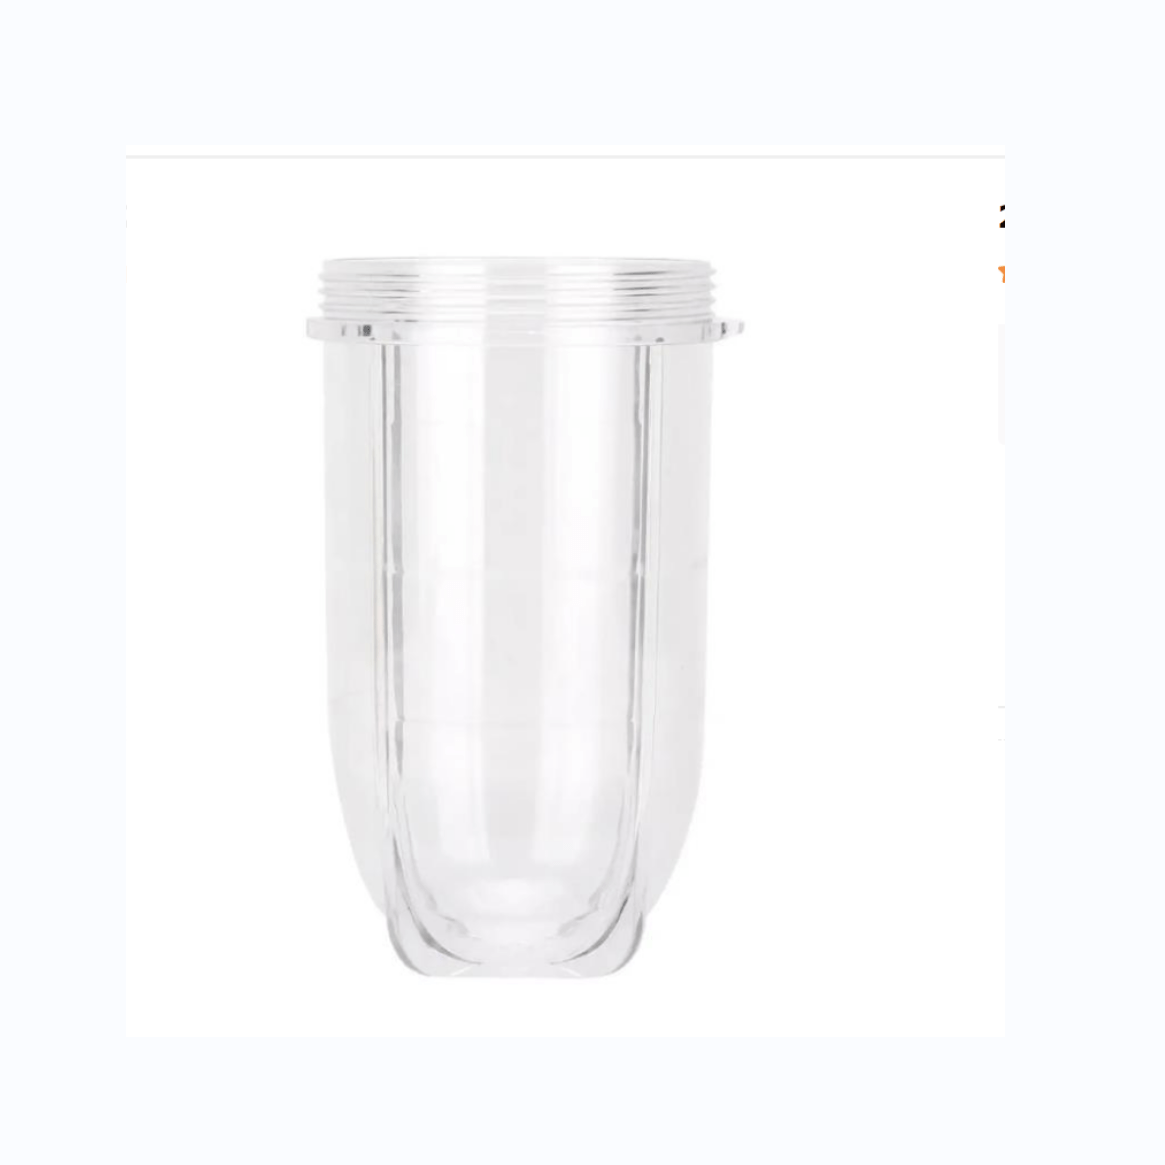 16oz Cups 6 Piece Set - 3 Replacement Cups WITH LIDS for Magic Bullet  Blender LIDS INCLUDED